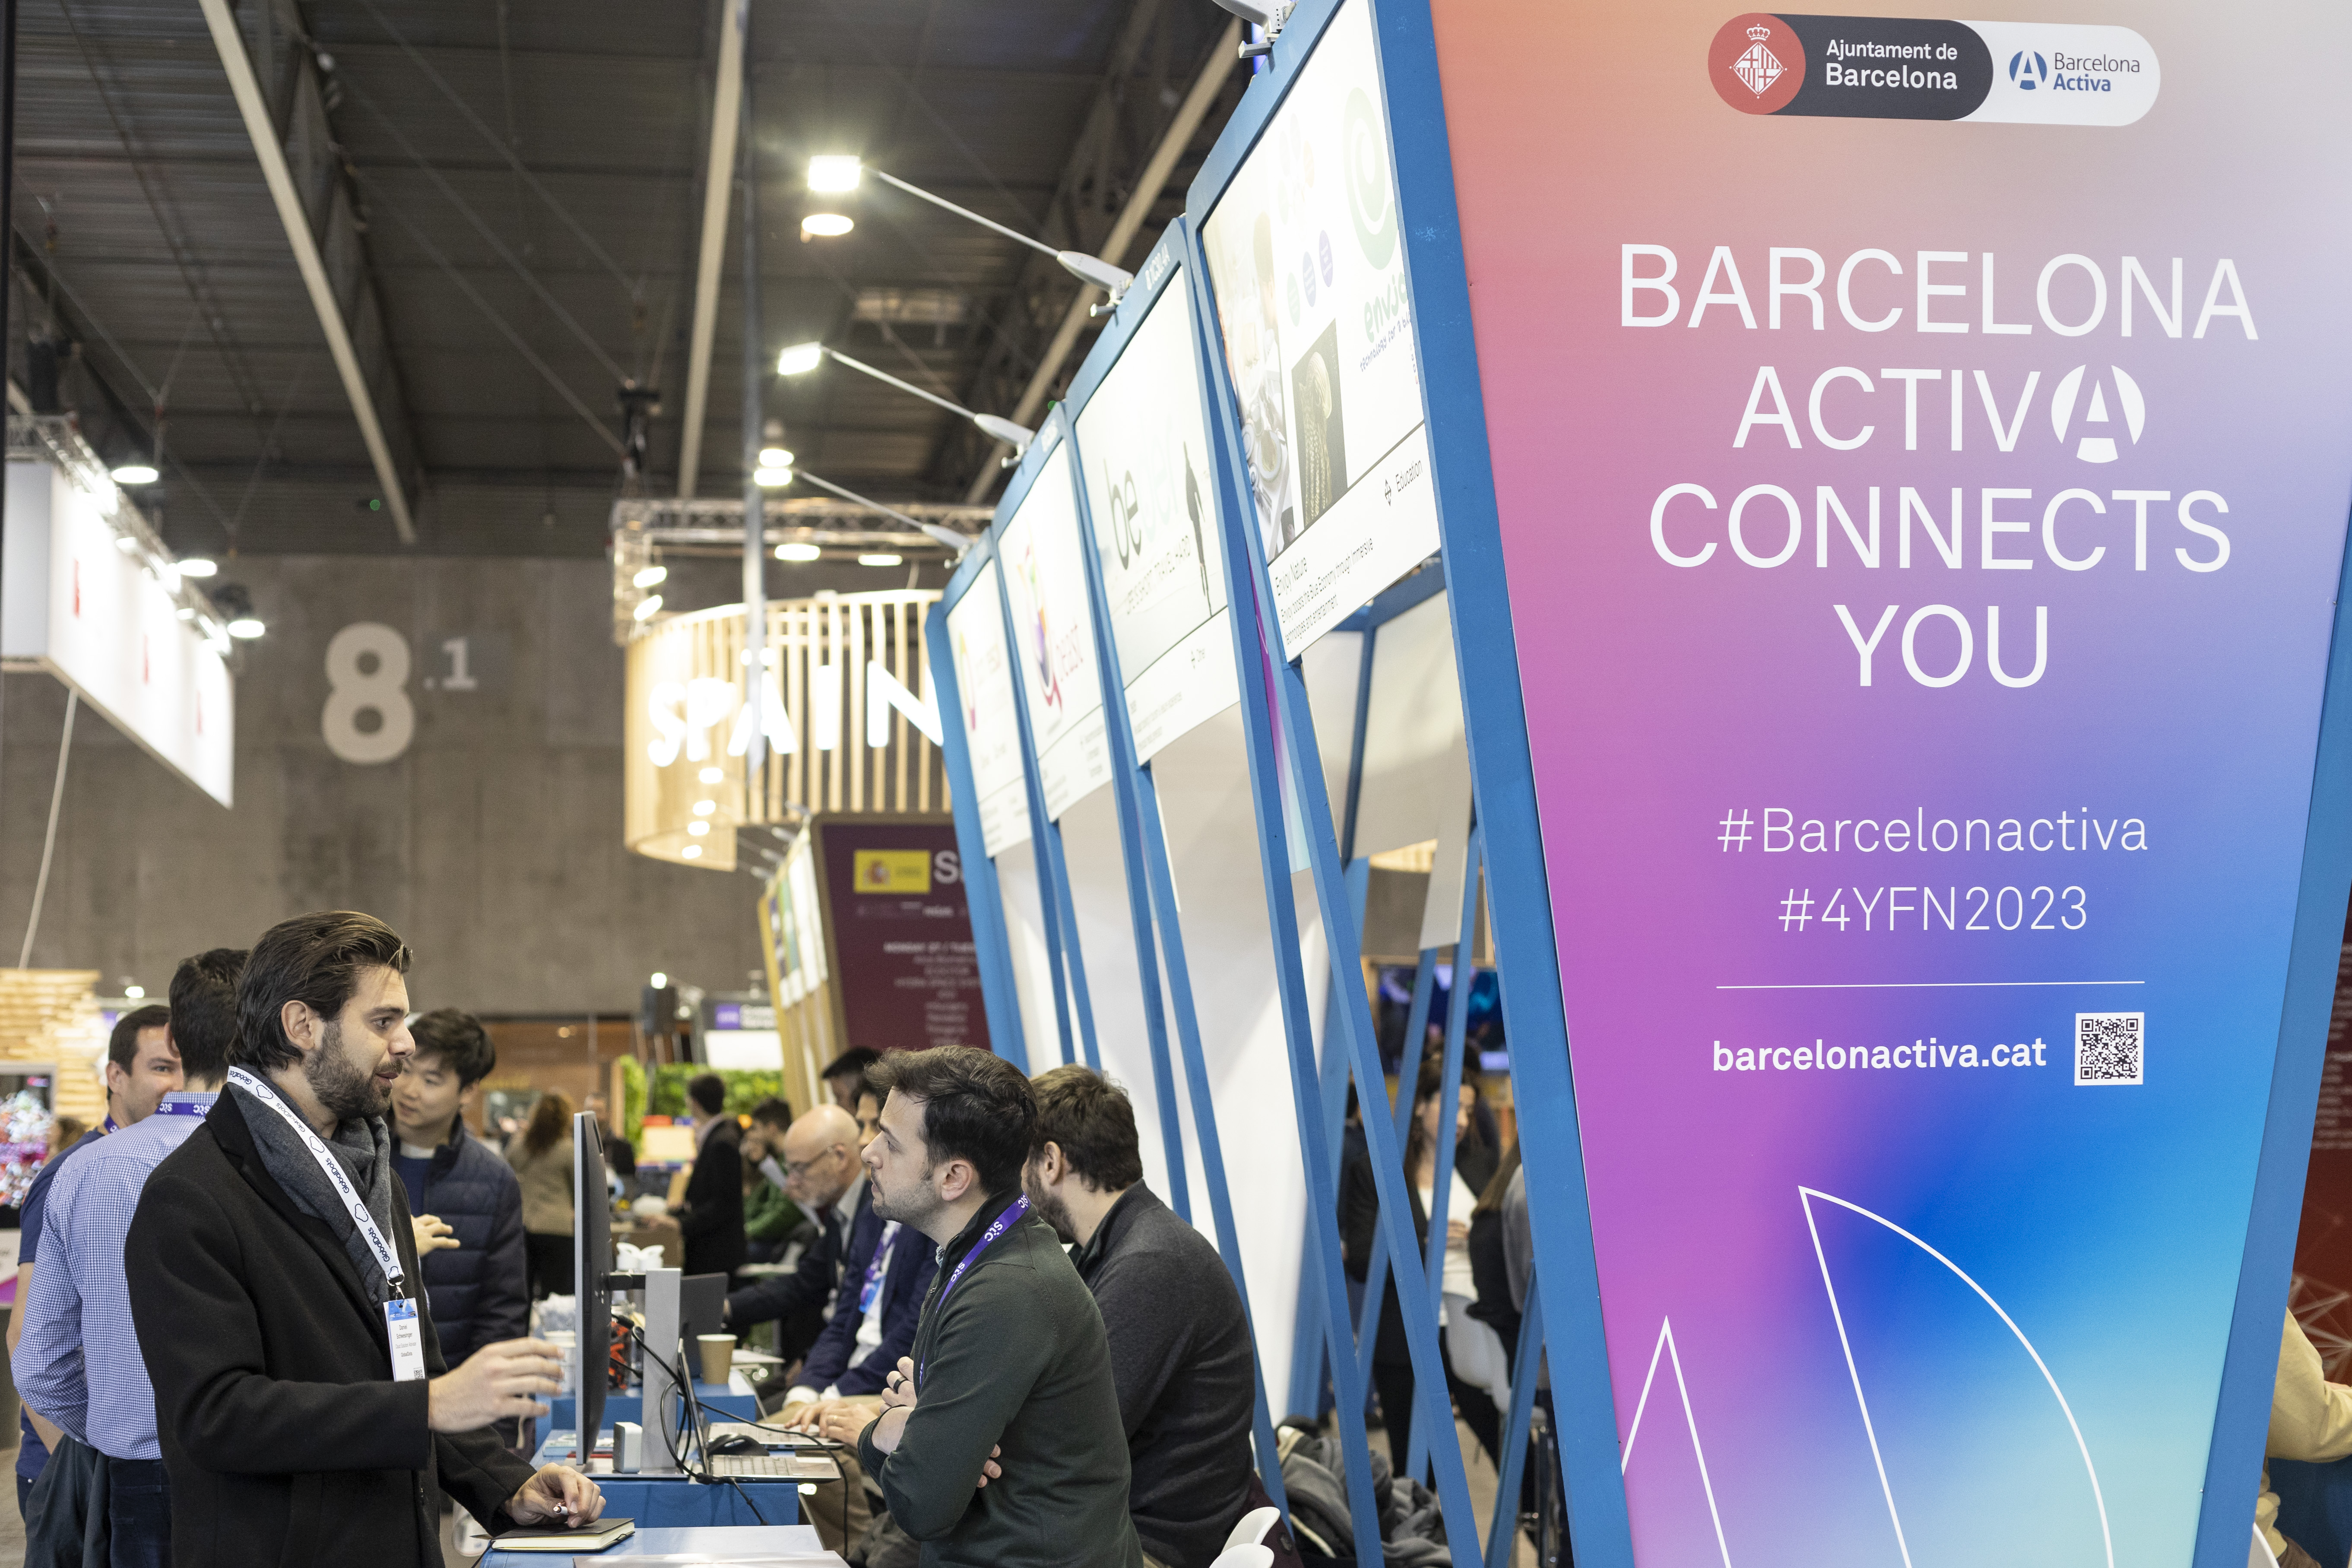 Barcelona Activa will form part of the 4YFN-MWC congress from 26th to 29th February to boost the city's entrepreneurial ecosystem